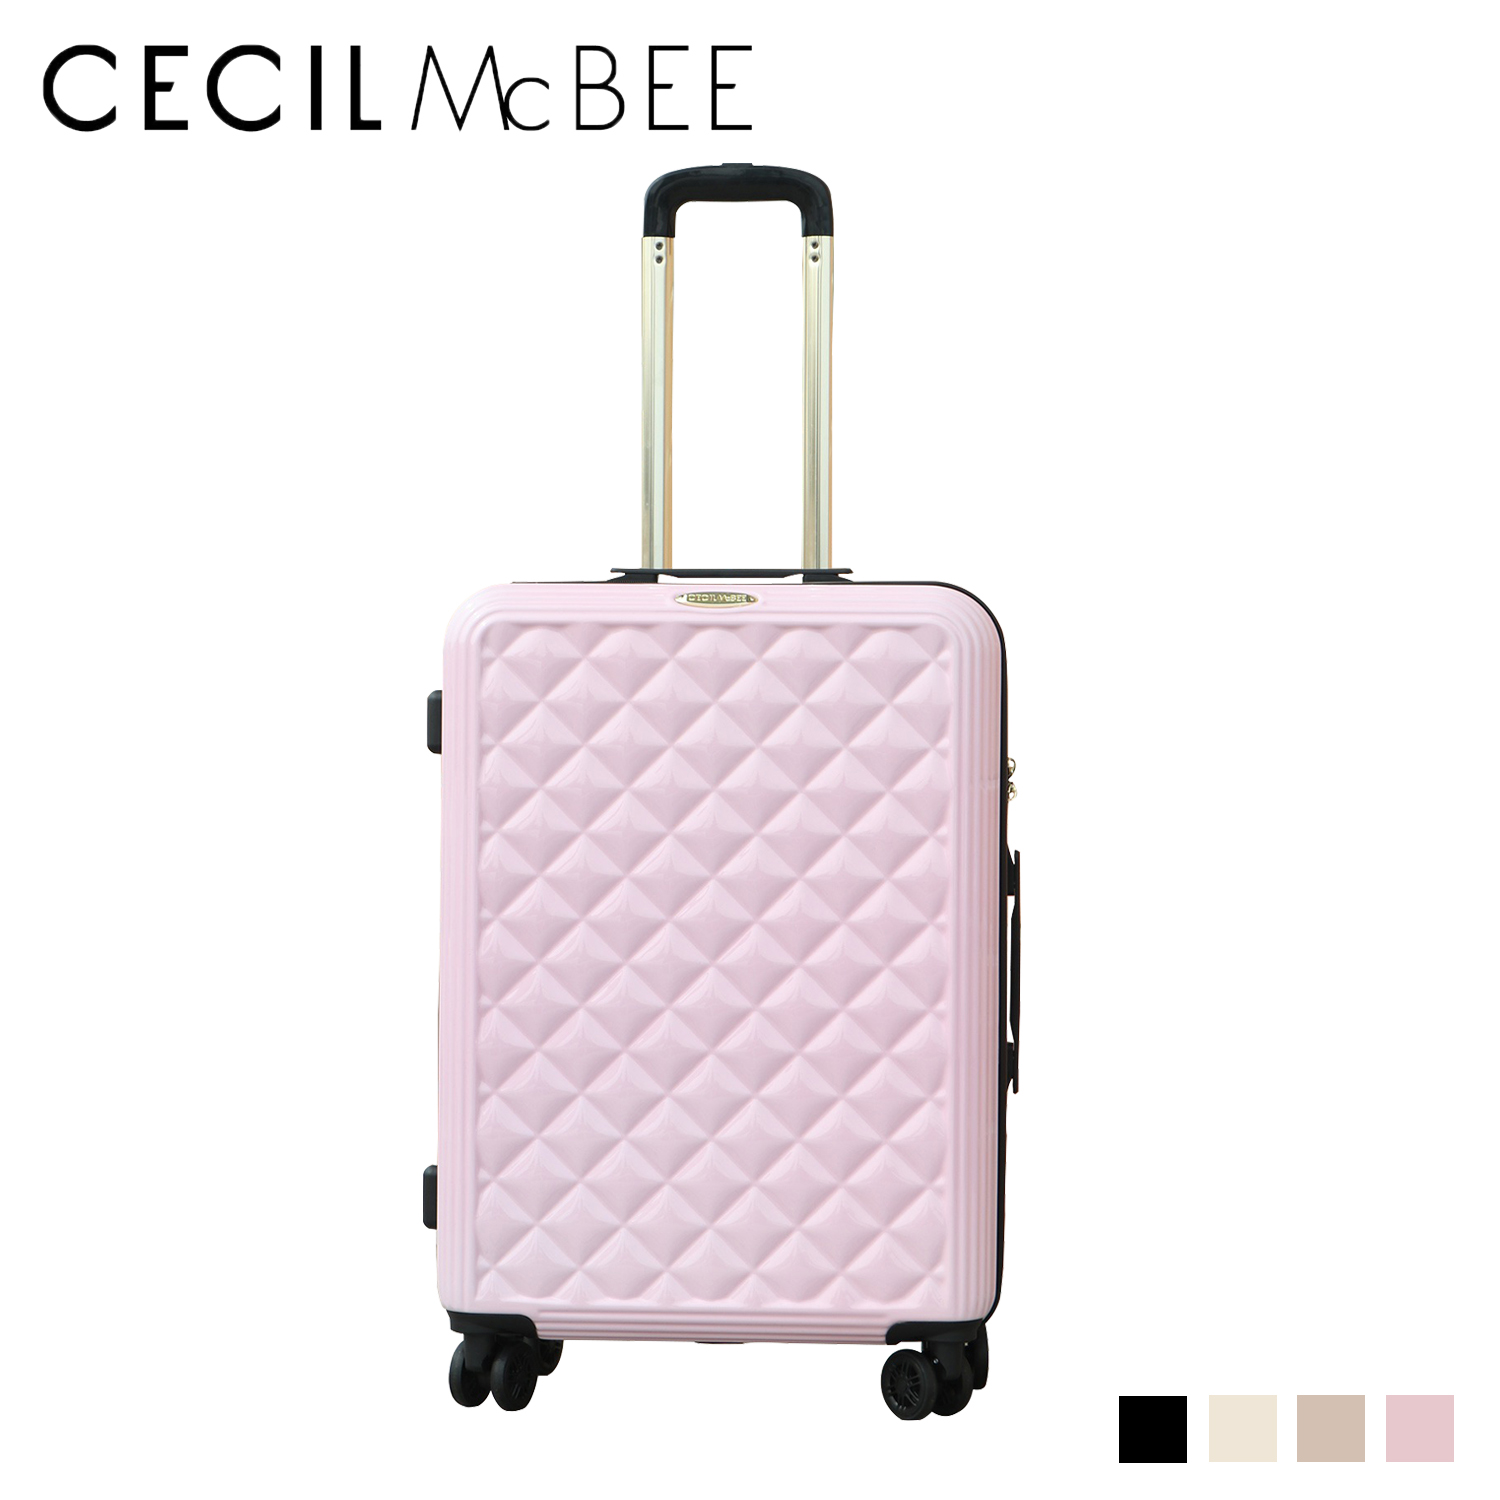 CECIL McBEE セシルマクビー キャリーケース キャリーバッグ ニューキルト レディース 53L NEW QUILT CARRY CASE L  CM12-4-00026